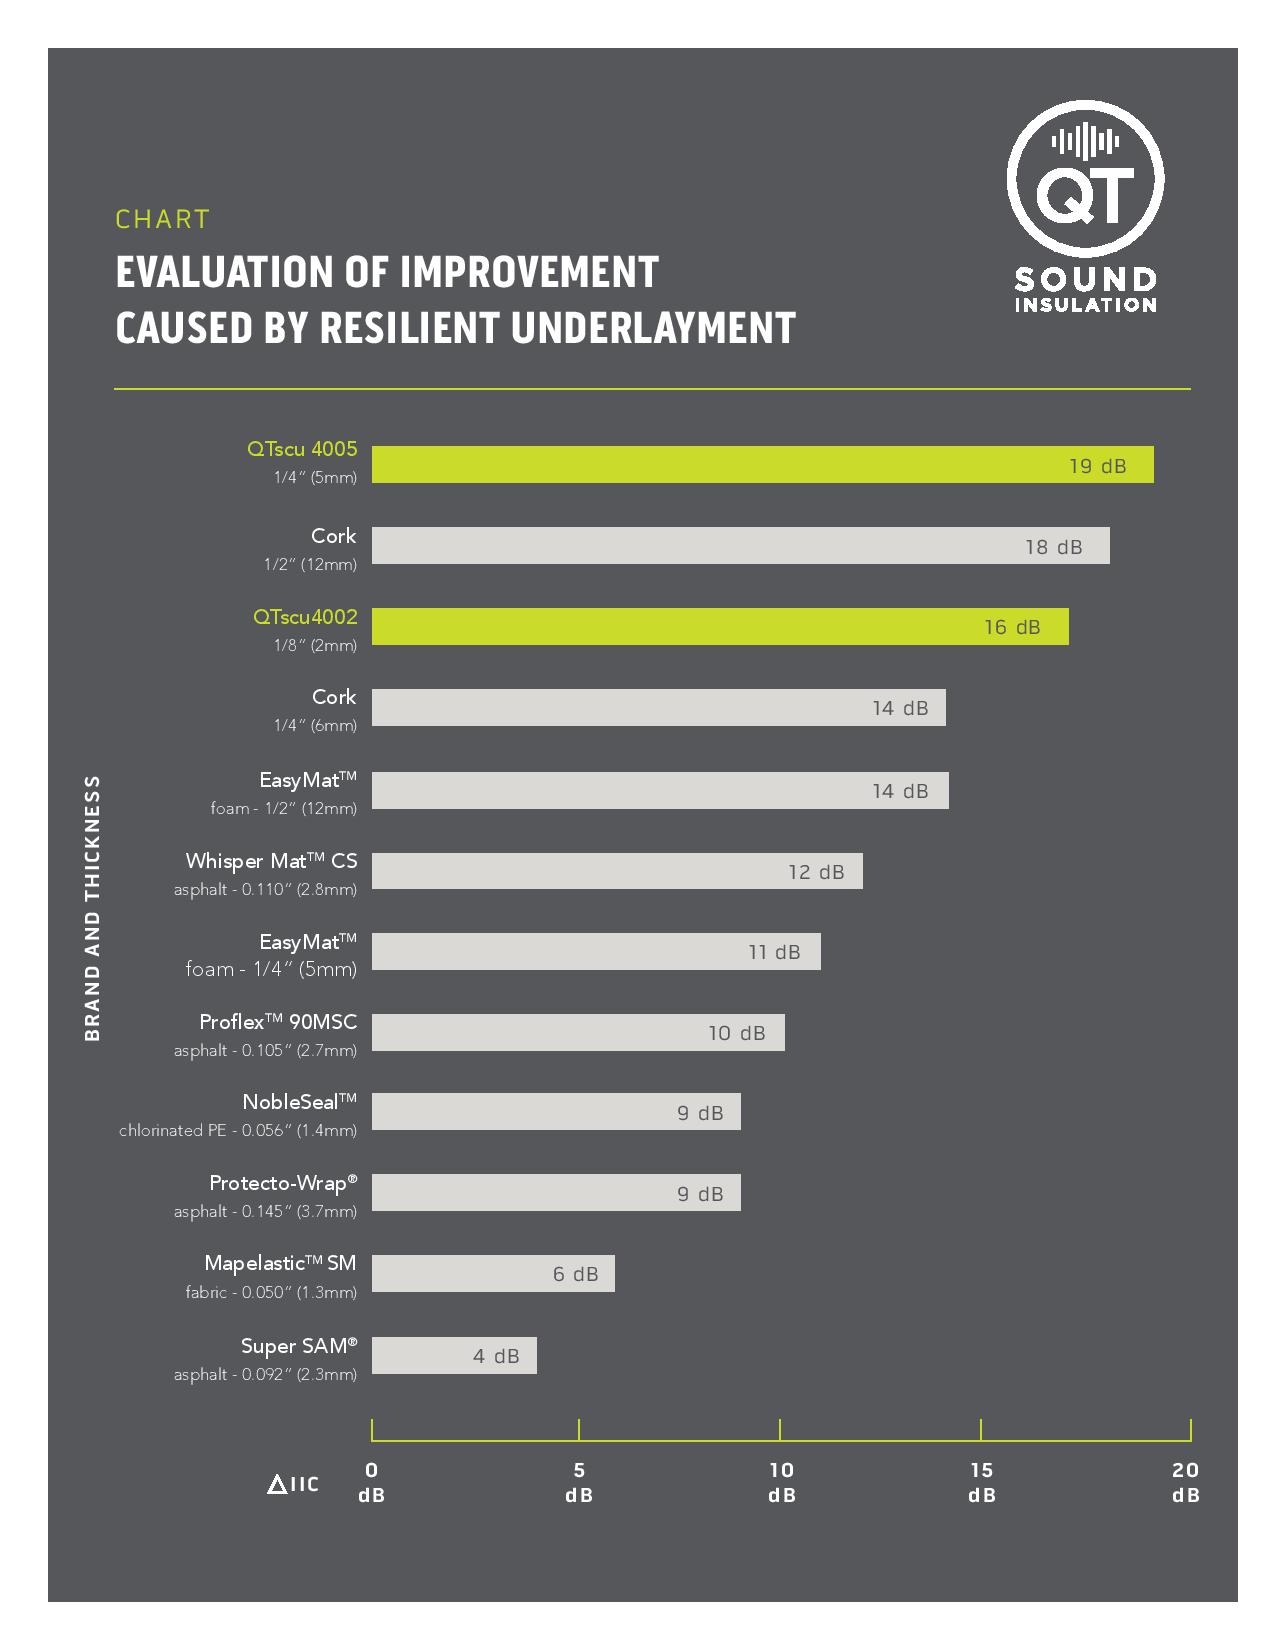 Evaluation of Improvement caused by the resilient underlayment. See attached PDF